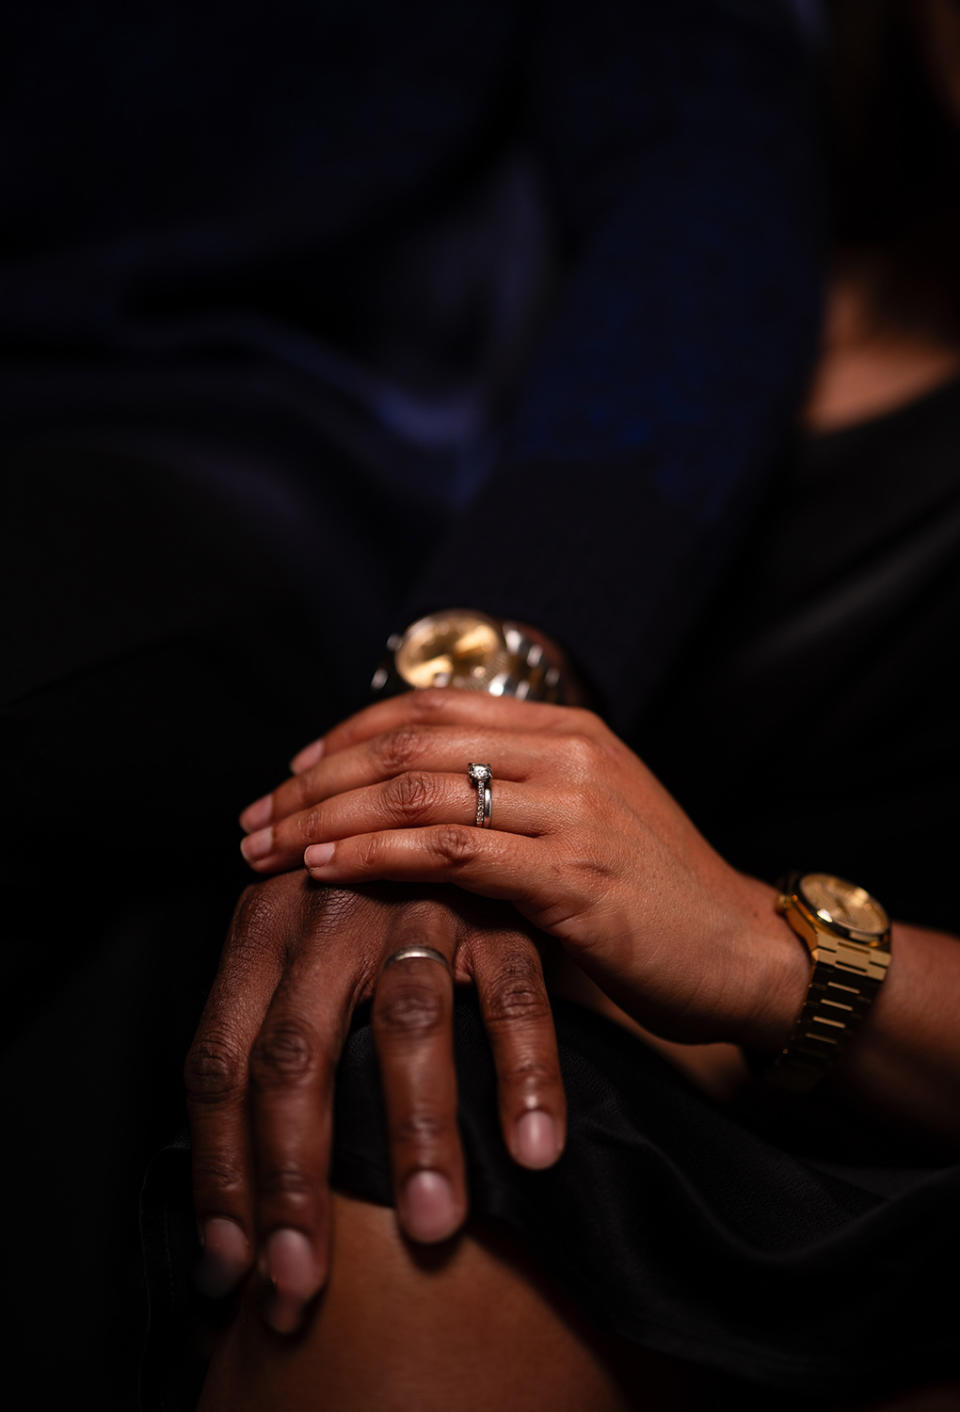 Close-up of two people holding hands, showcasing a wedding ring on one person's finger